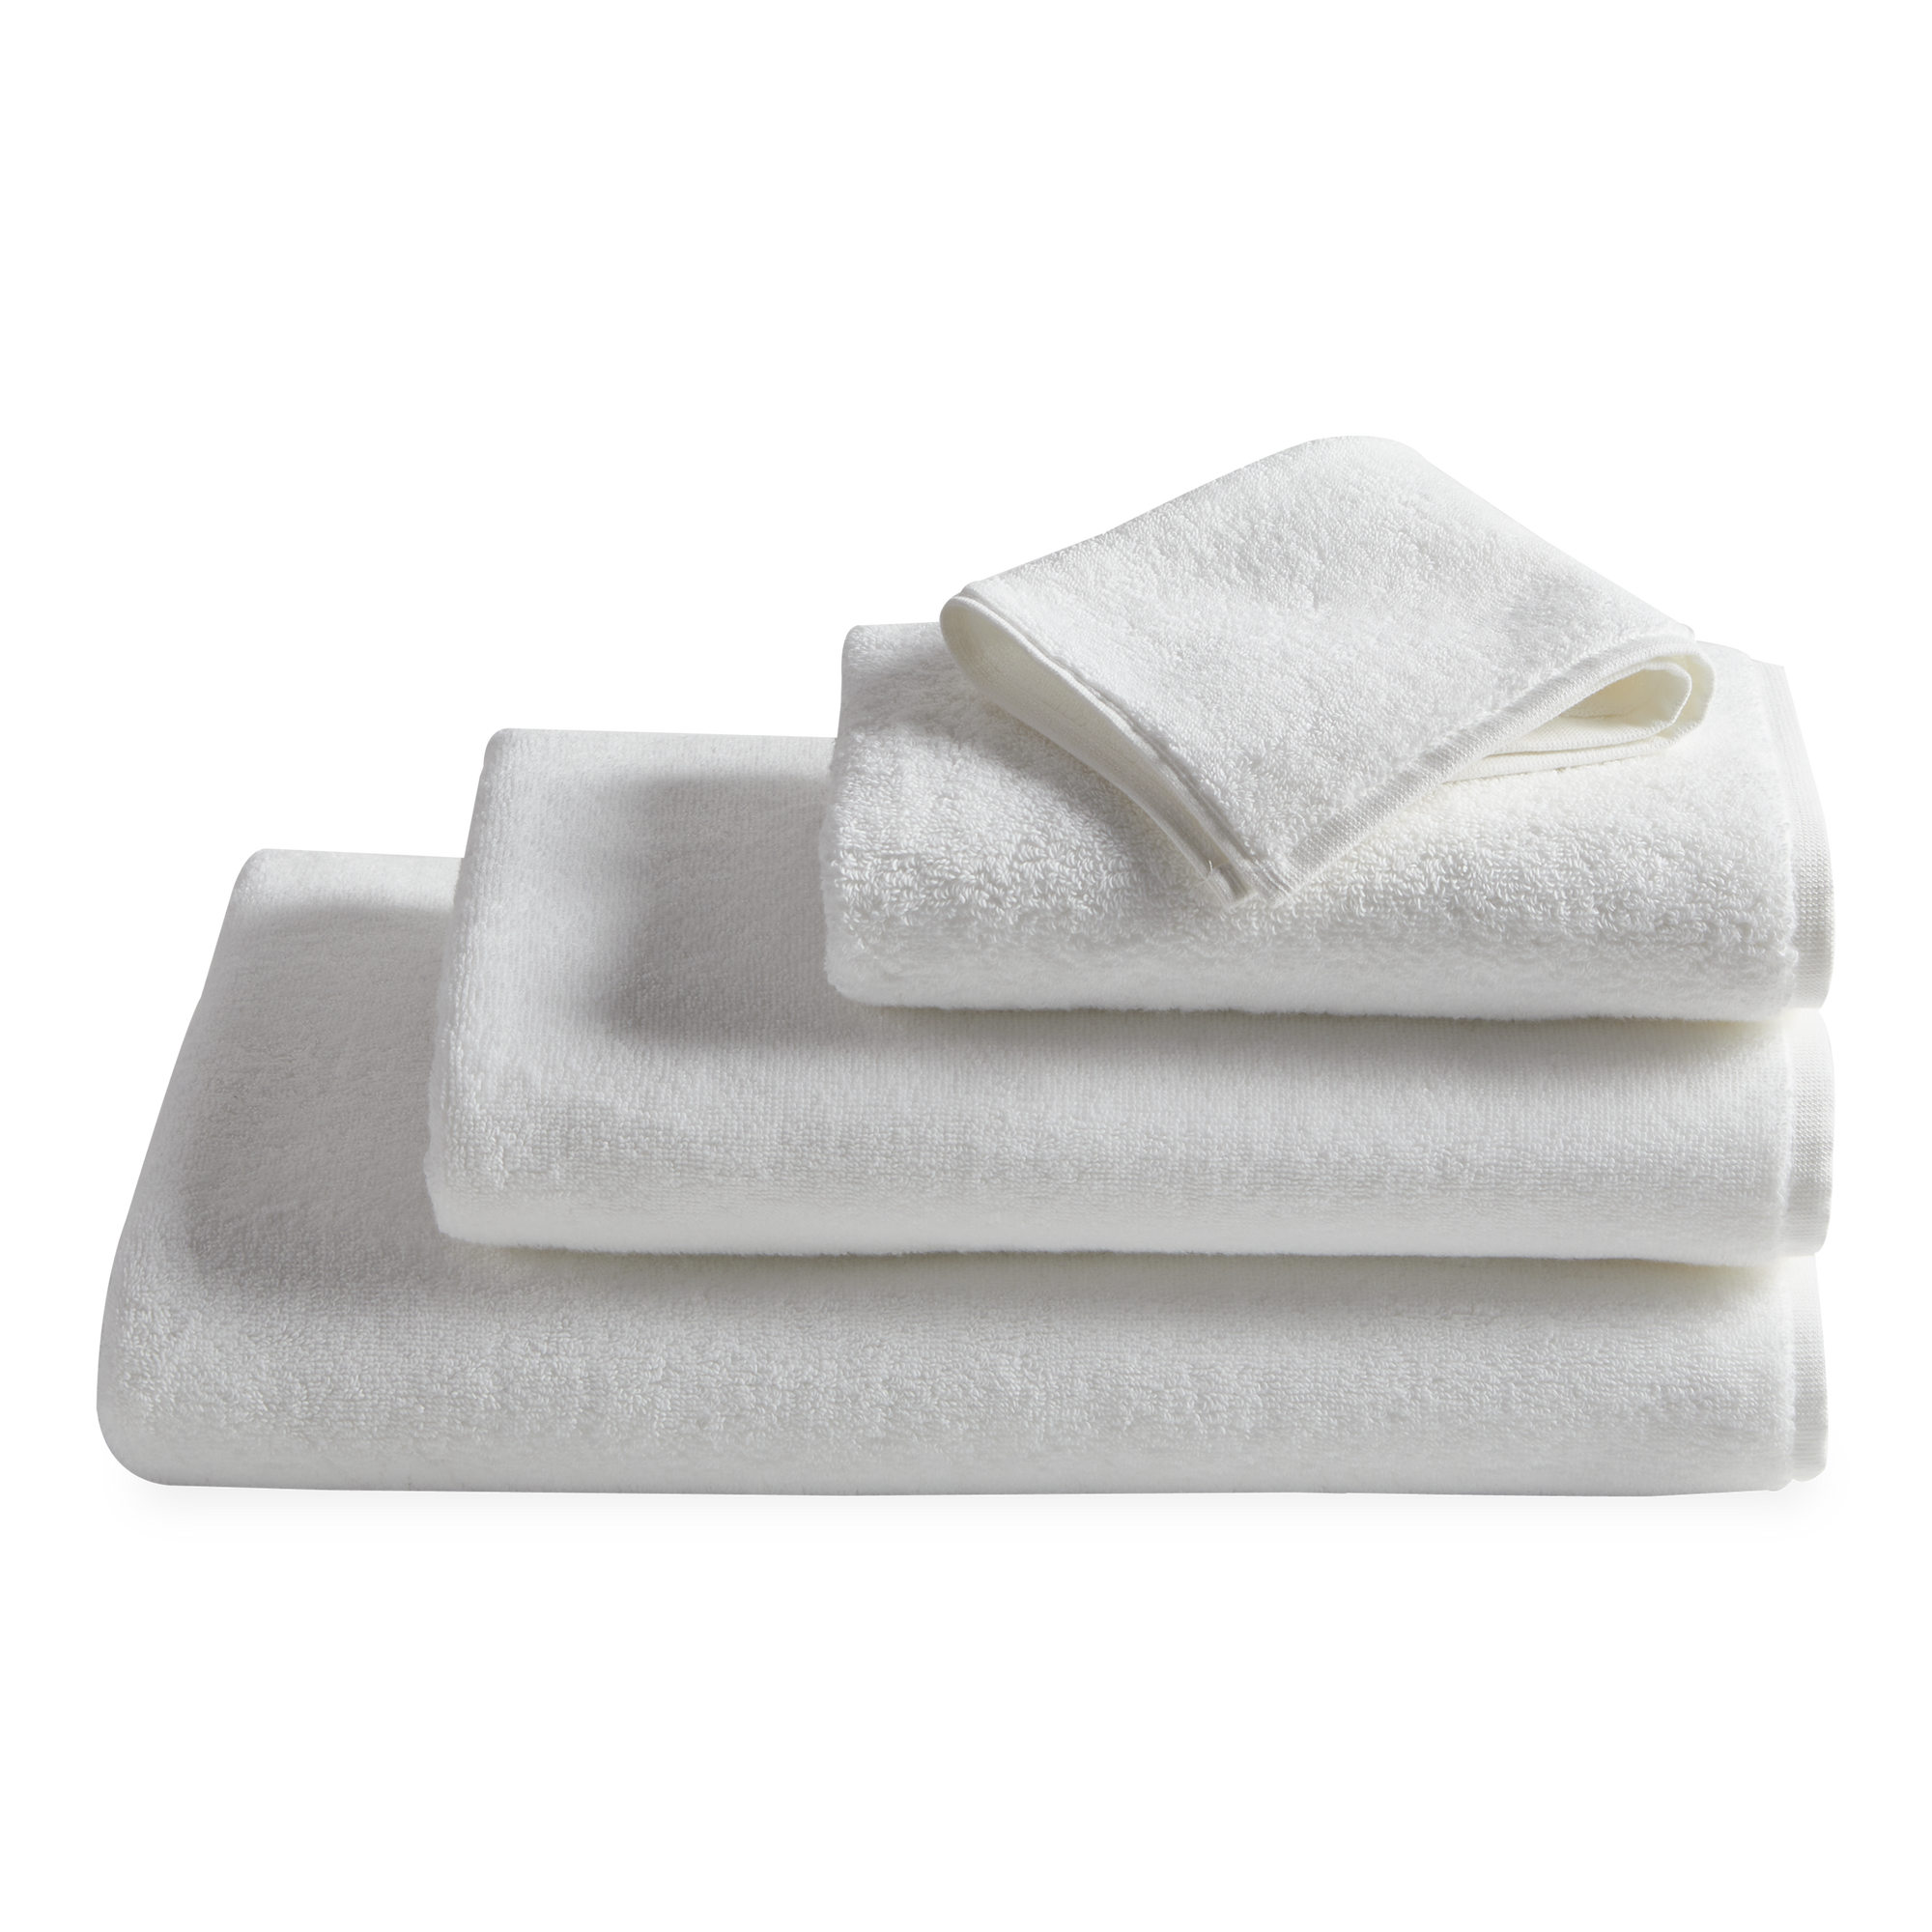 The Roger Towels are made in Turkey from 100% long staple Turkish cotton.